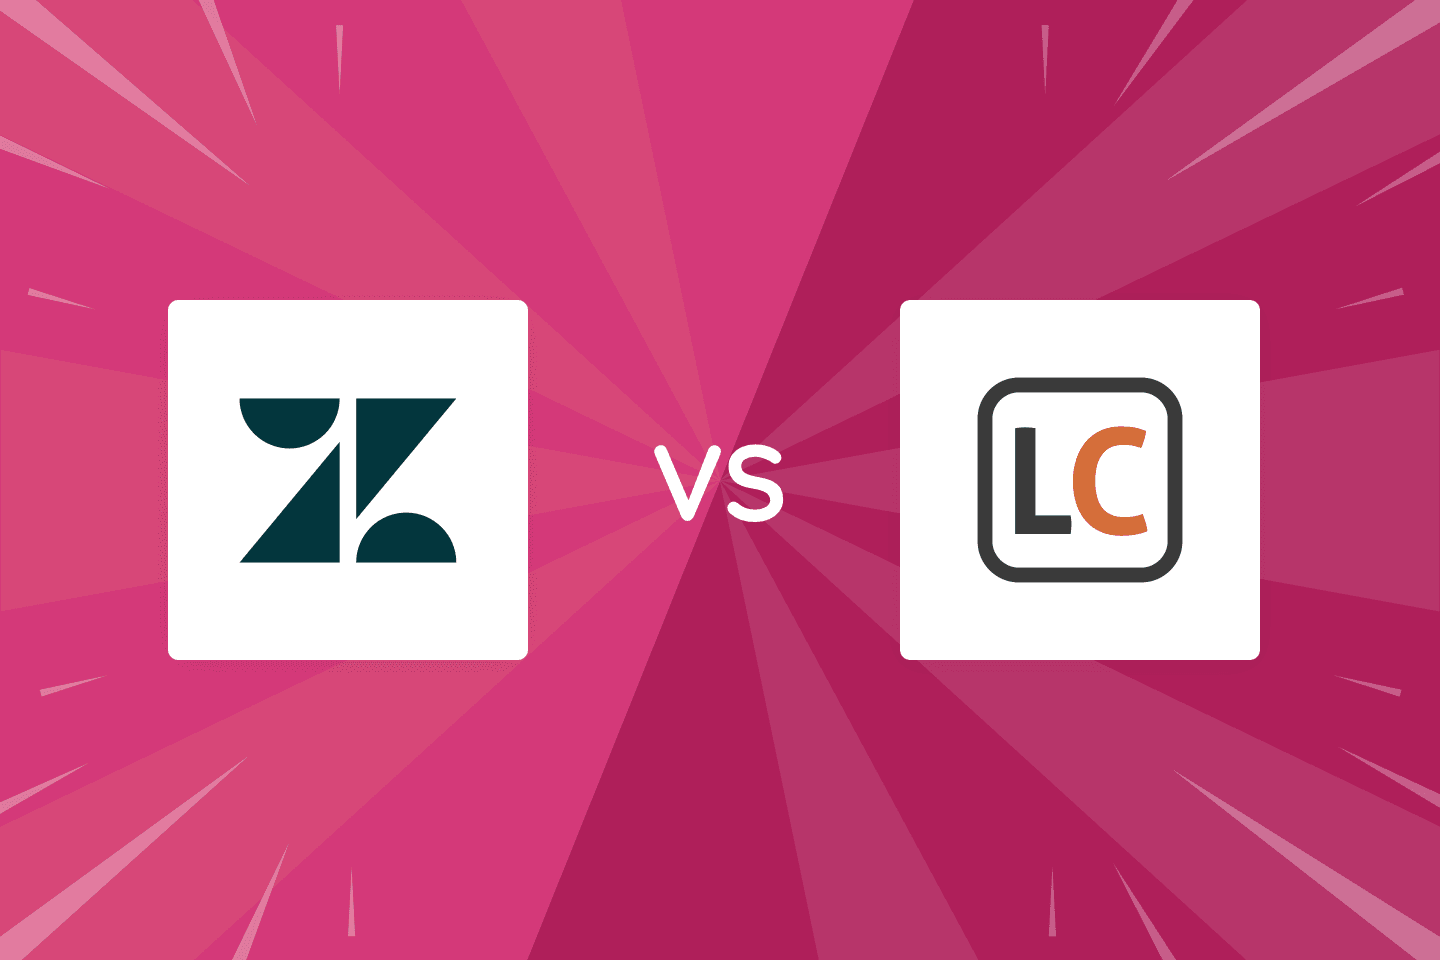 Zendesk Vs Livechat Which Software Better Fits Your Business Needs